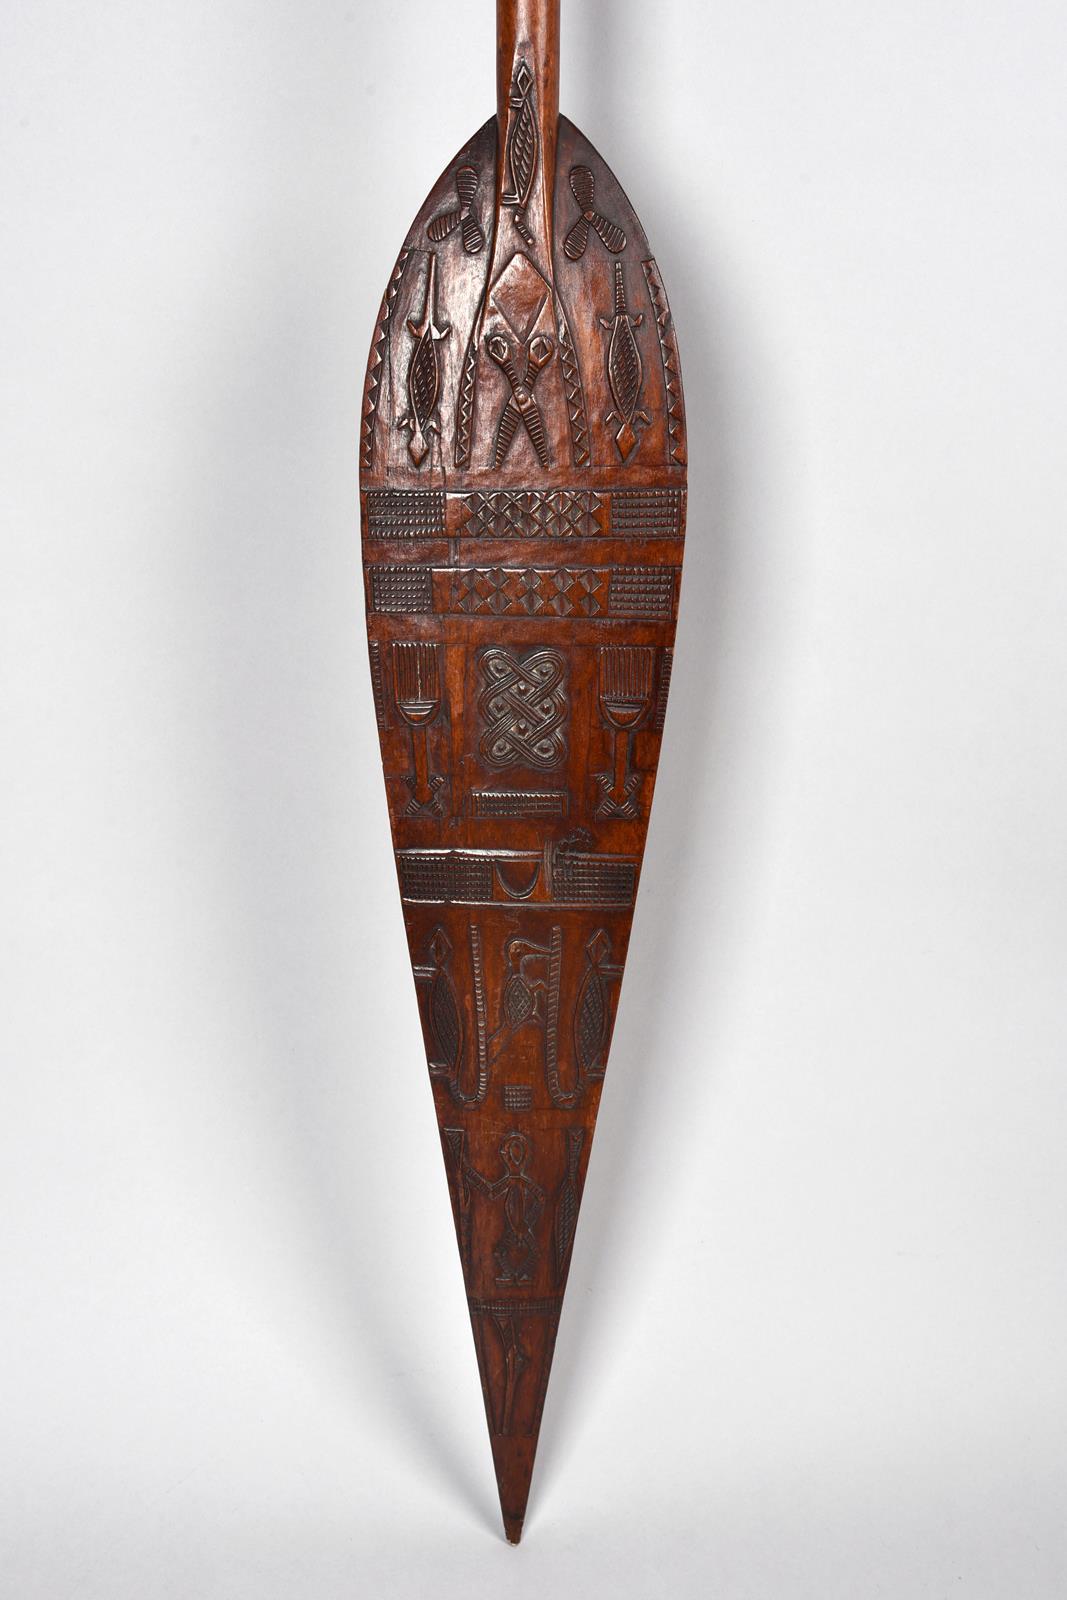 A Duala paddle Cameroon the blade with low relief carving of animals, padlocks, keys, scissors,